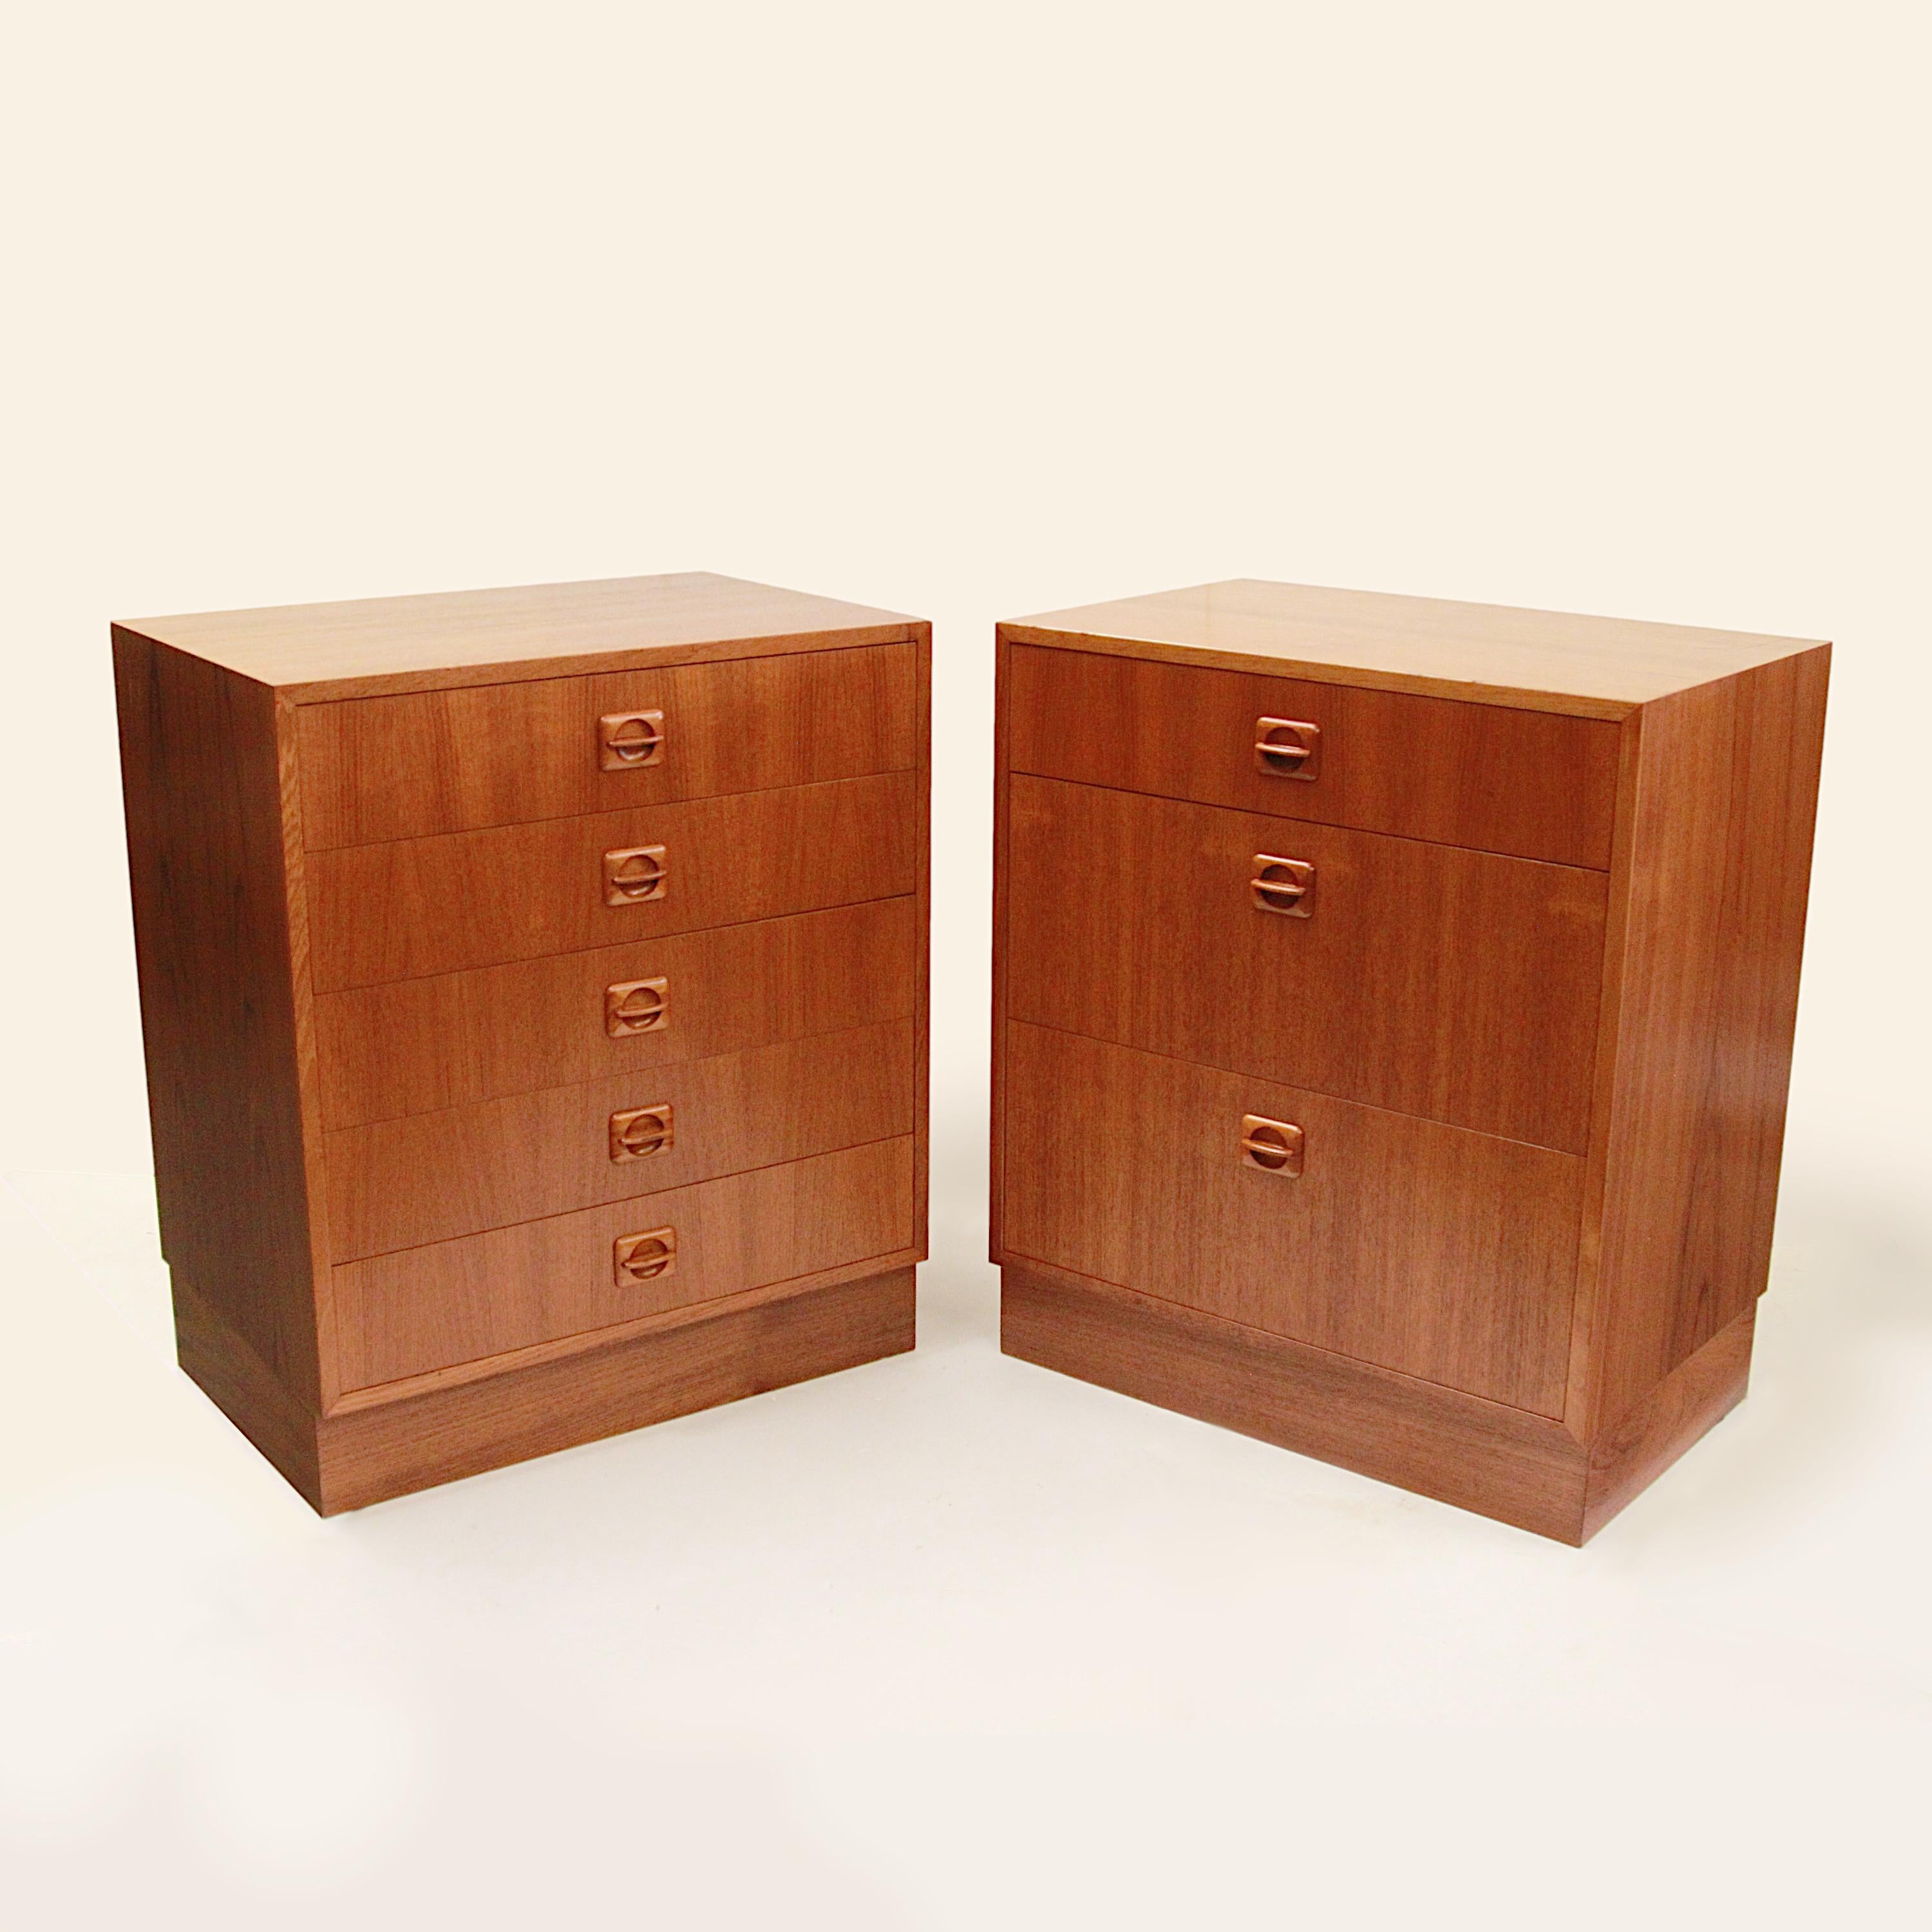 Wonderful matching pair of Danish dressers/nightstands. Dressers feature gorgeous teak veneer, sculpted teak drawer pulls and plenty of drawers (5 & 3 respectively)! With their soft wood tones Minimalist lines, and ample storage, these would make